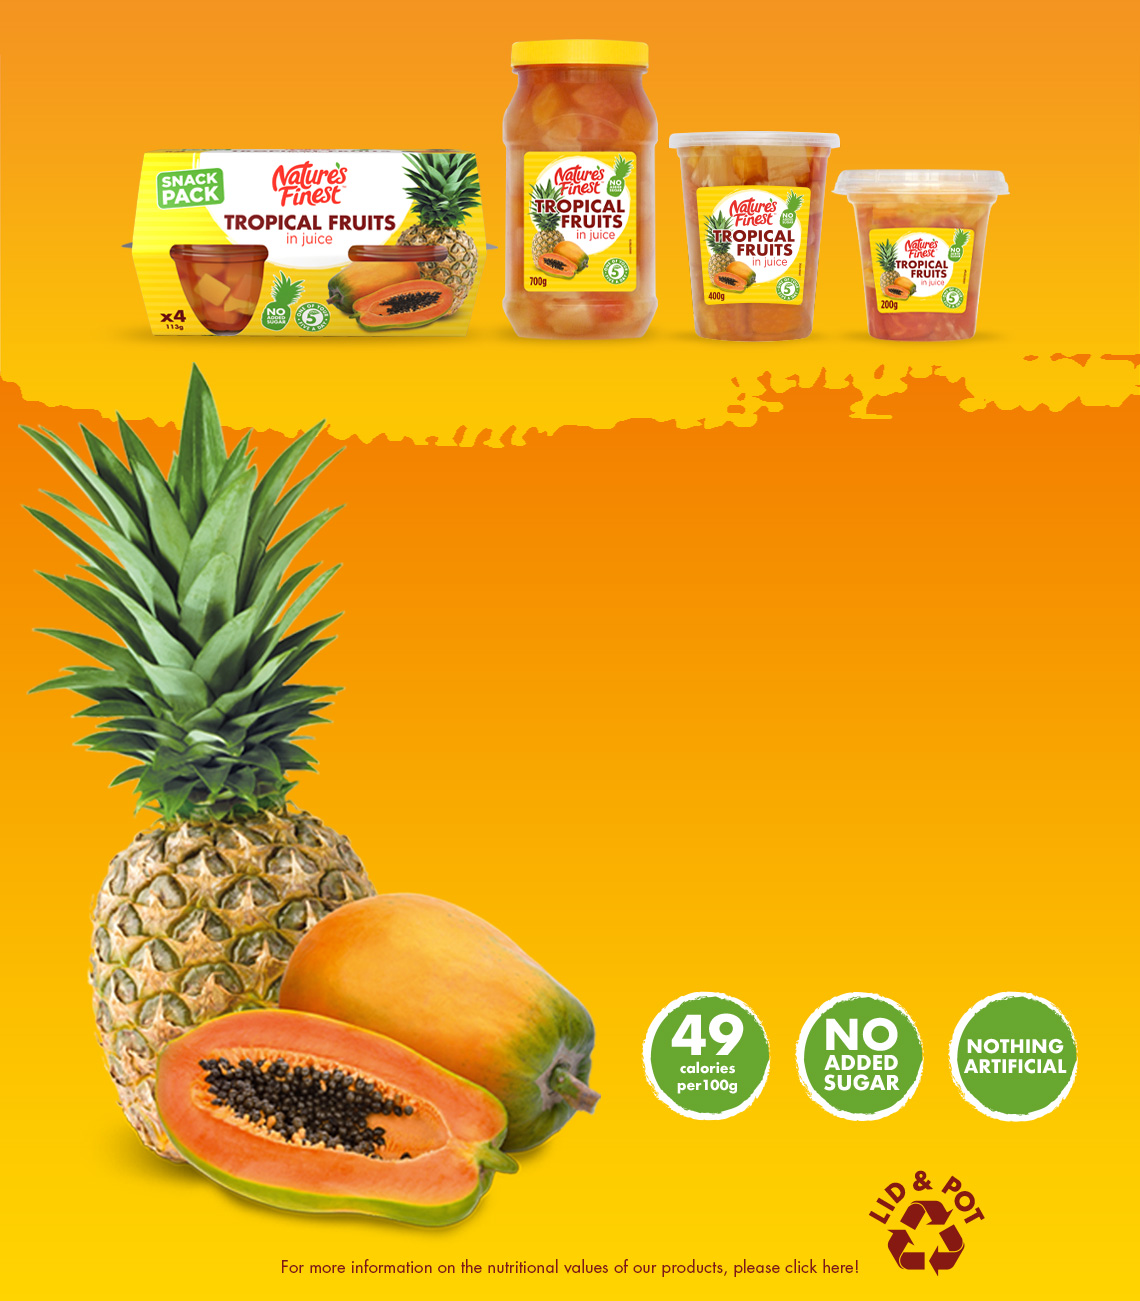 Tropical Fruits Products